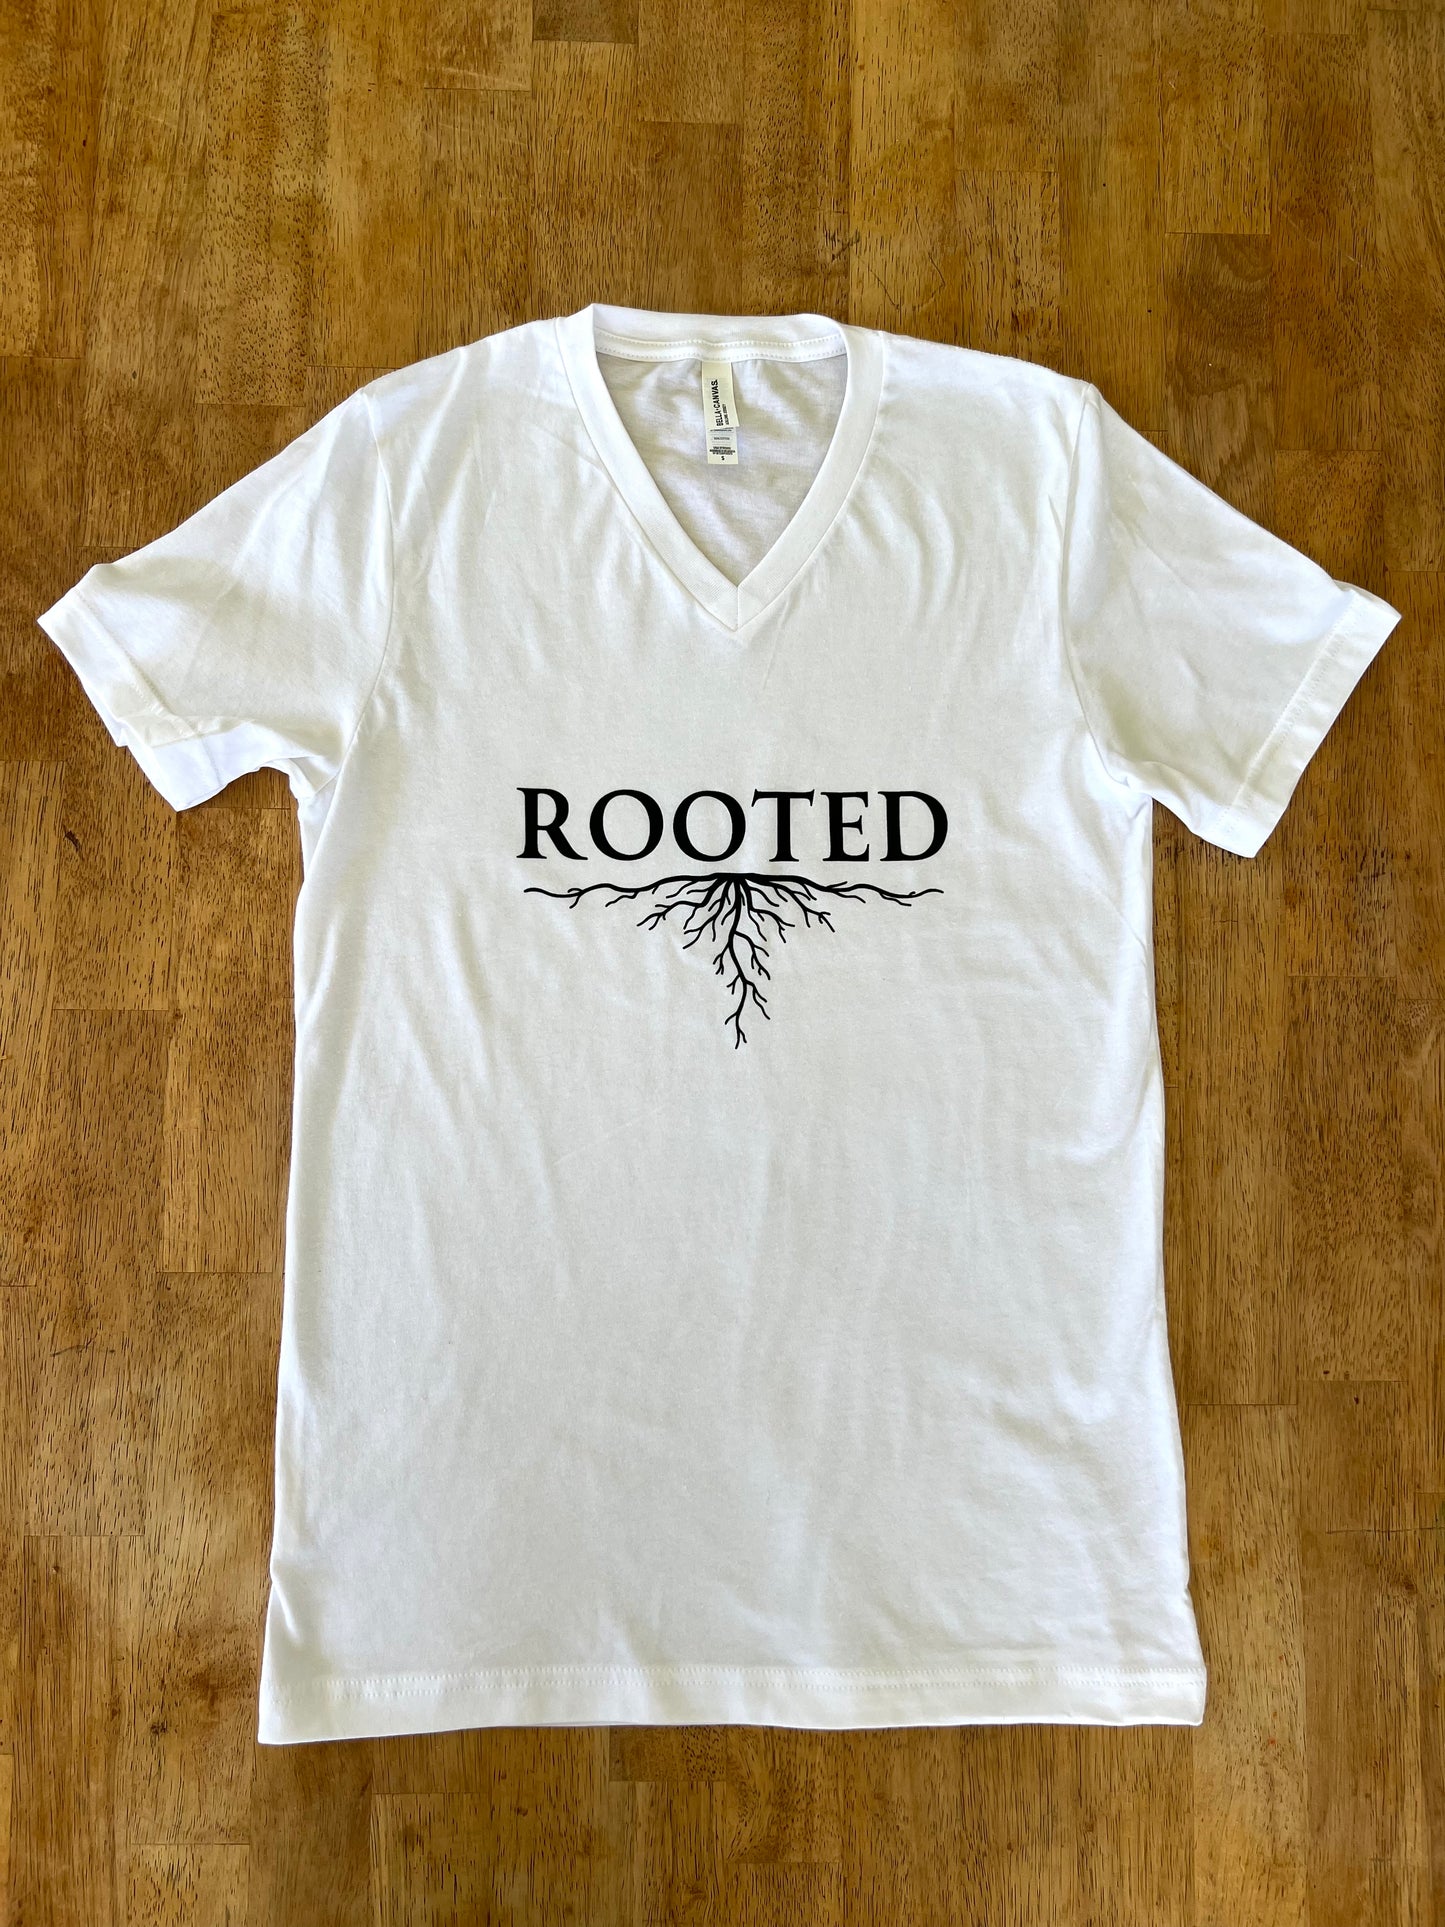 Rooted T-Shirt